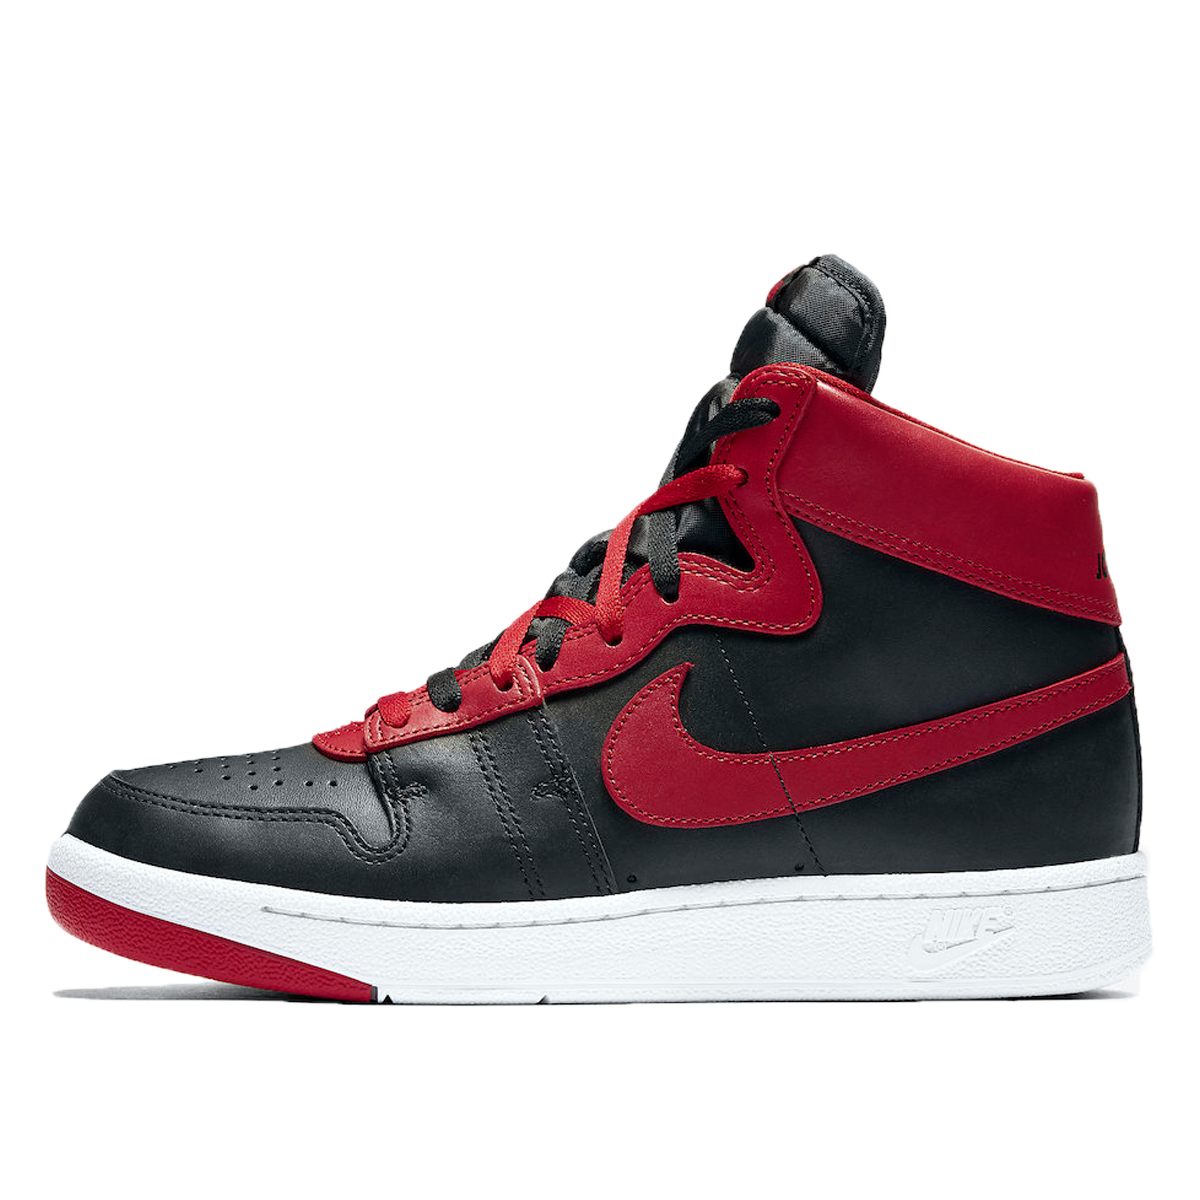 Nike Air Ship Pro Banned 'Special Edition' (2020) | CD4302-006 - KLEKT